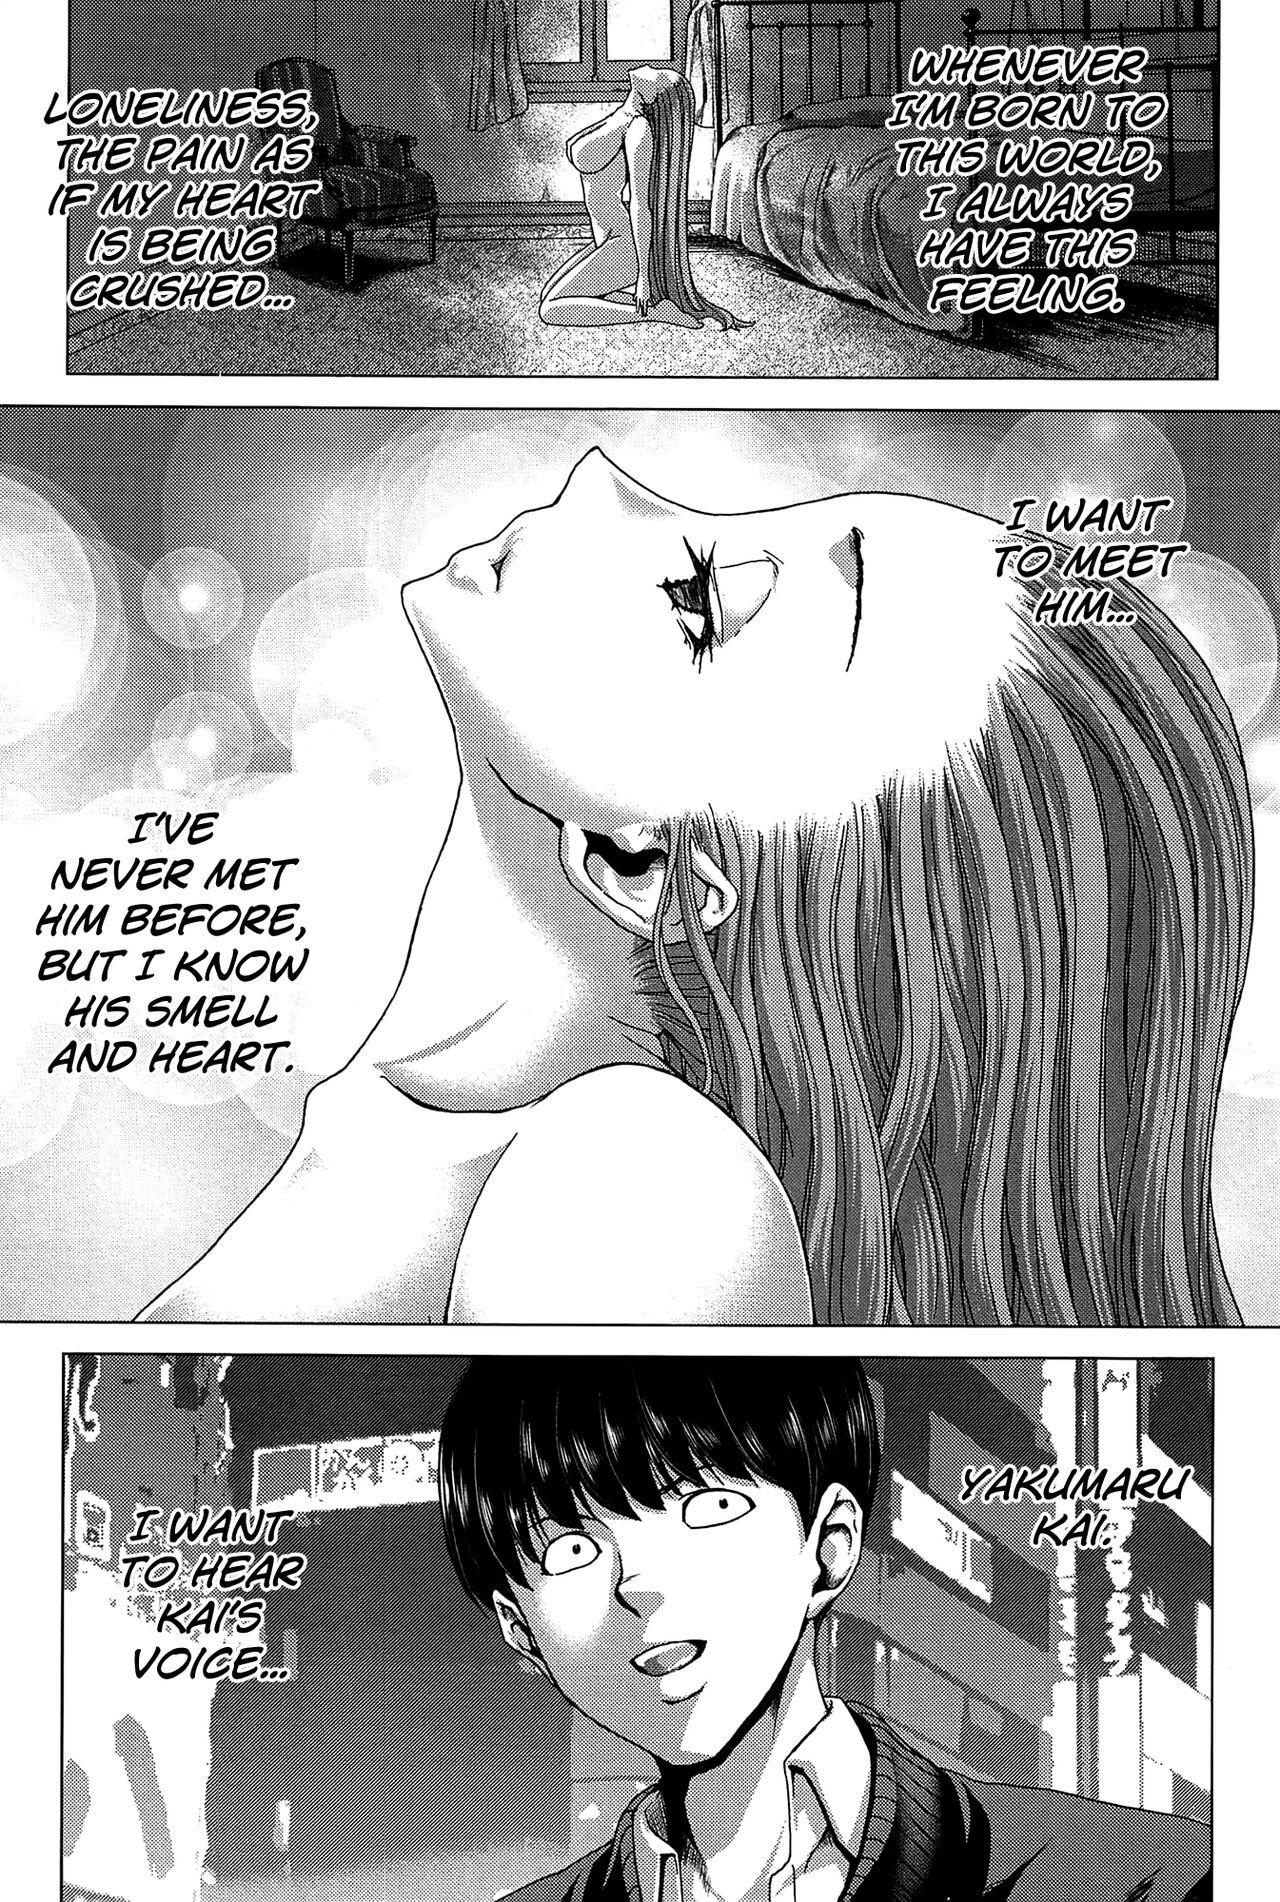 Chica Saki Mujer - Page 8